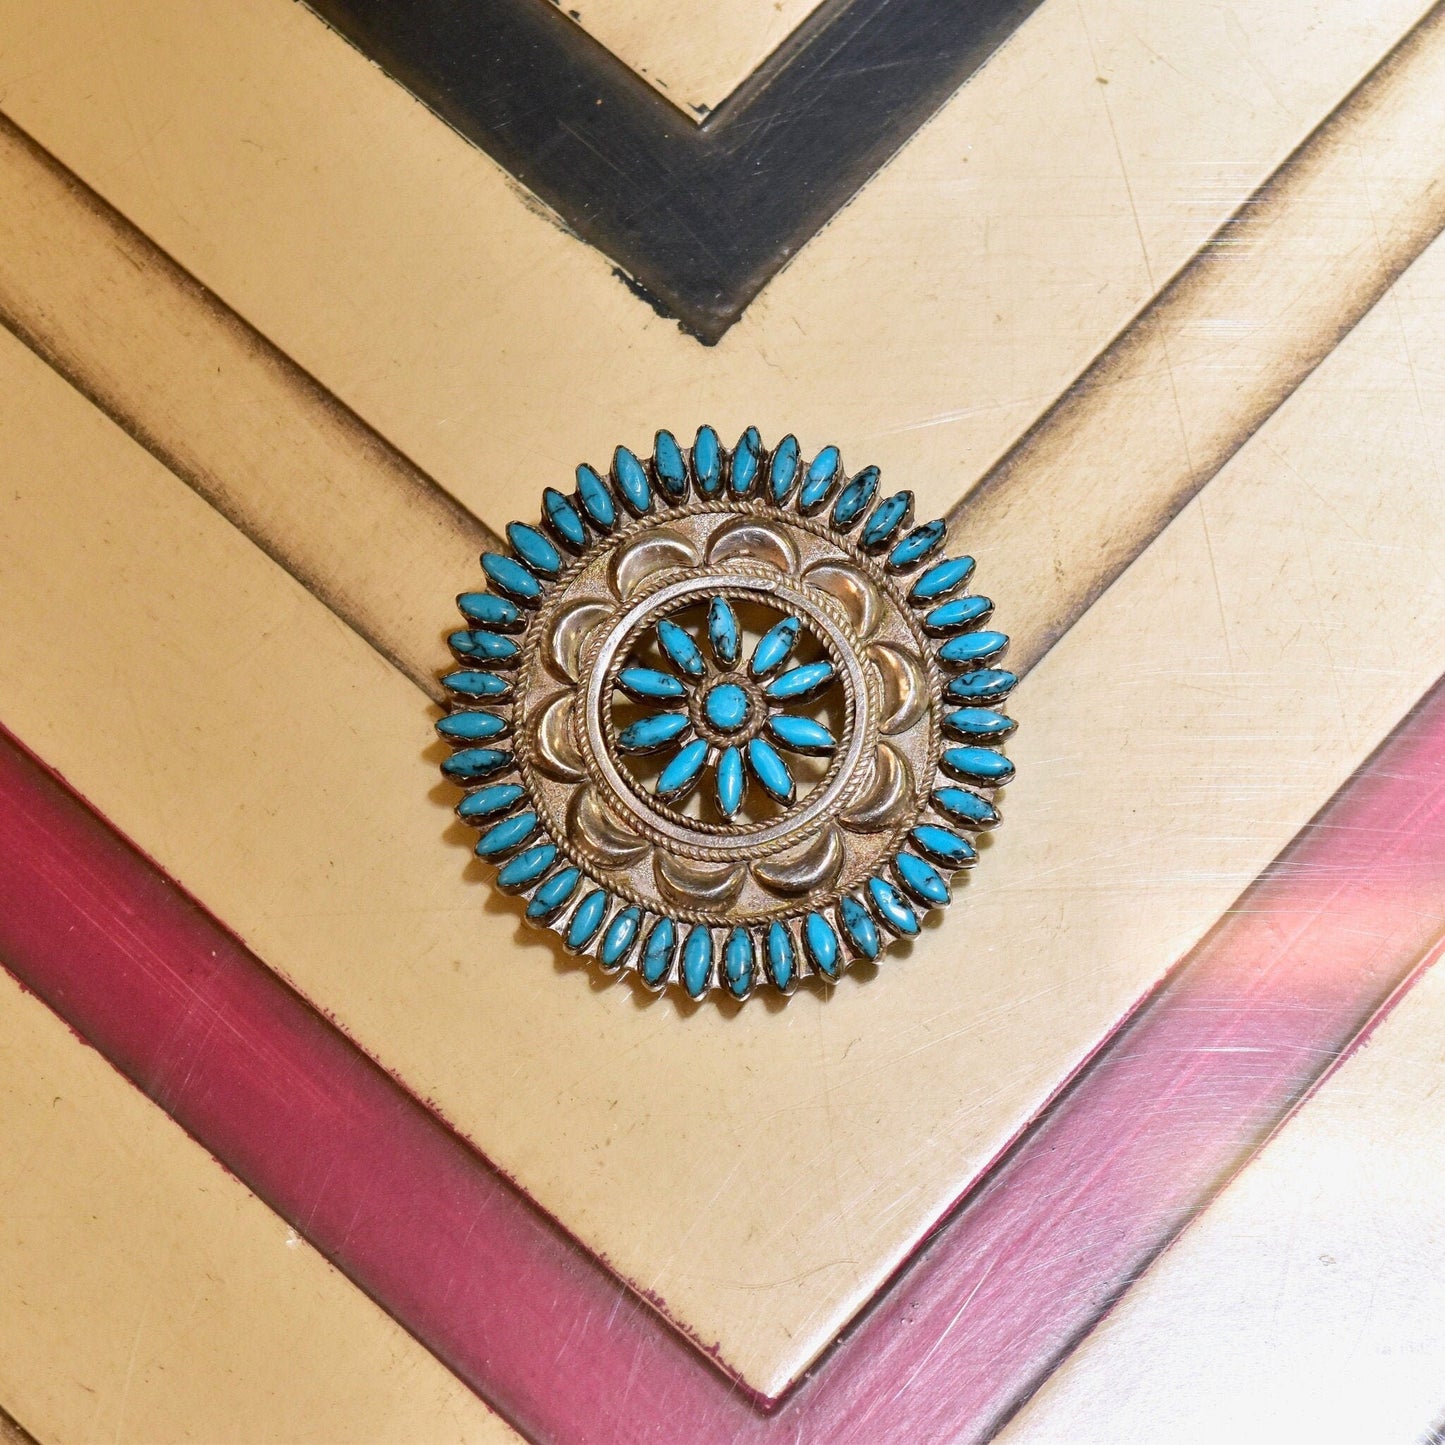 Zuni Needlepoint Turquoise Brooch Pin, Native American Handmade Sterling Silver Turquoise Medallion Brooch, 2 1/2"